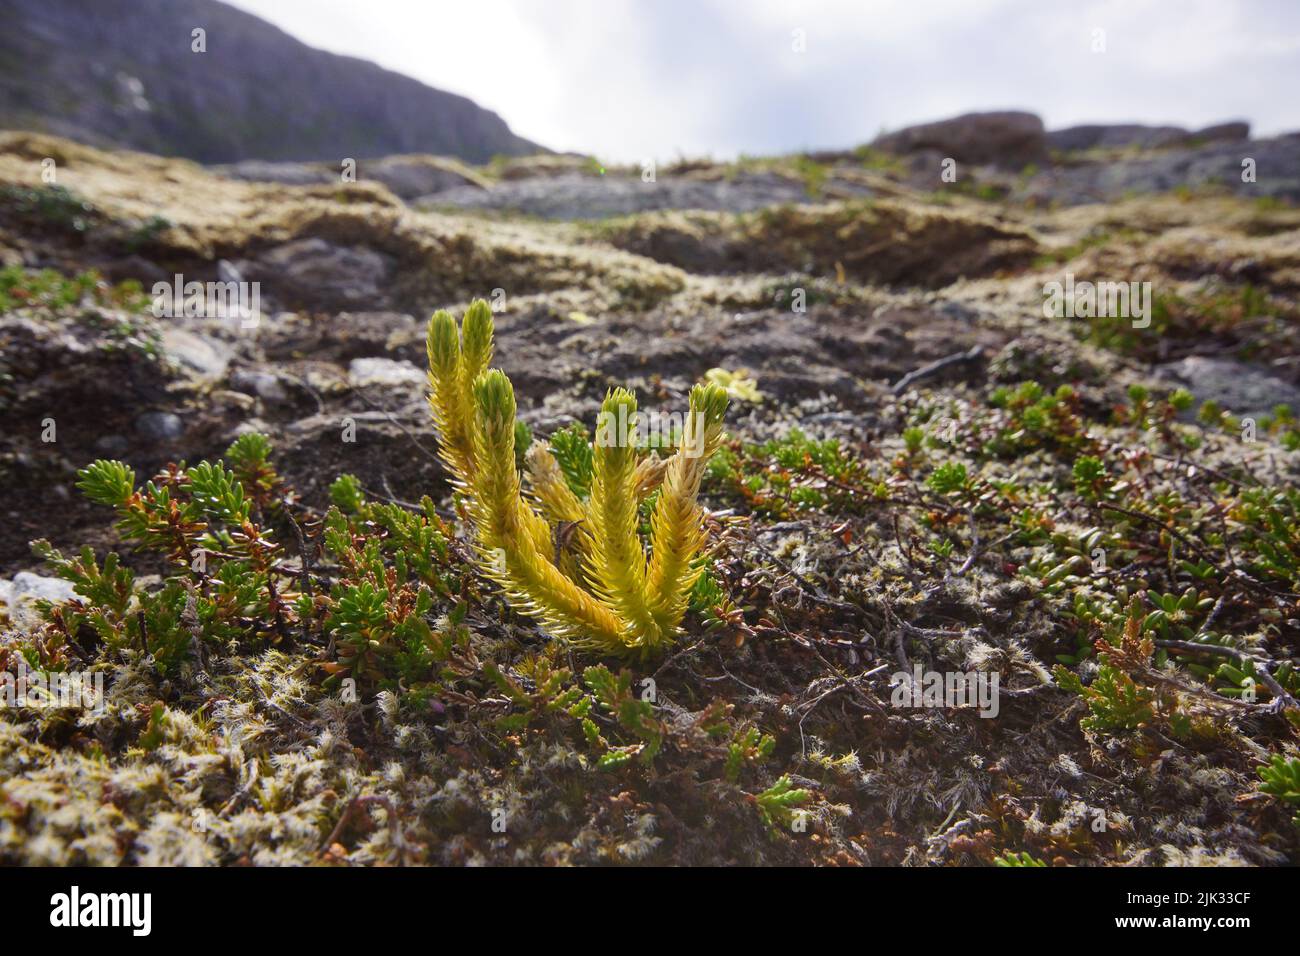 Northern firmoss (Huperzia selago) on a rock, Northern Norway Stock Photo